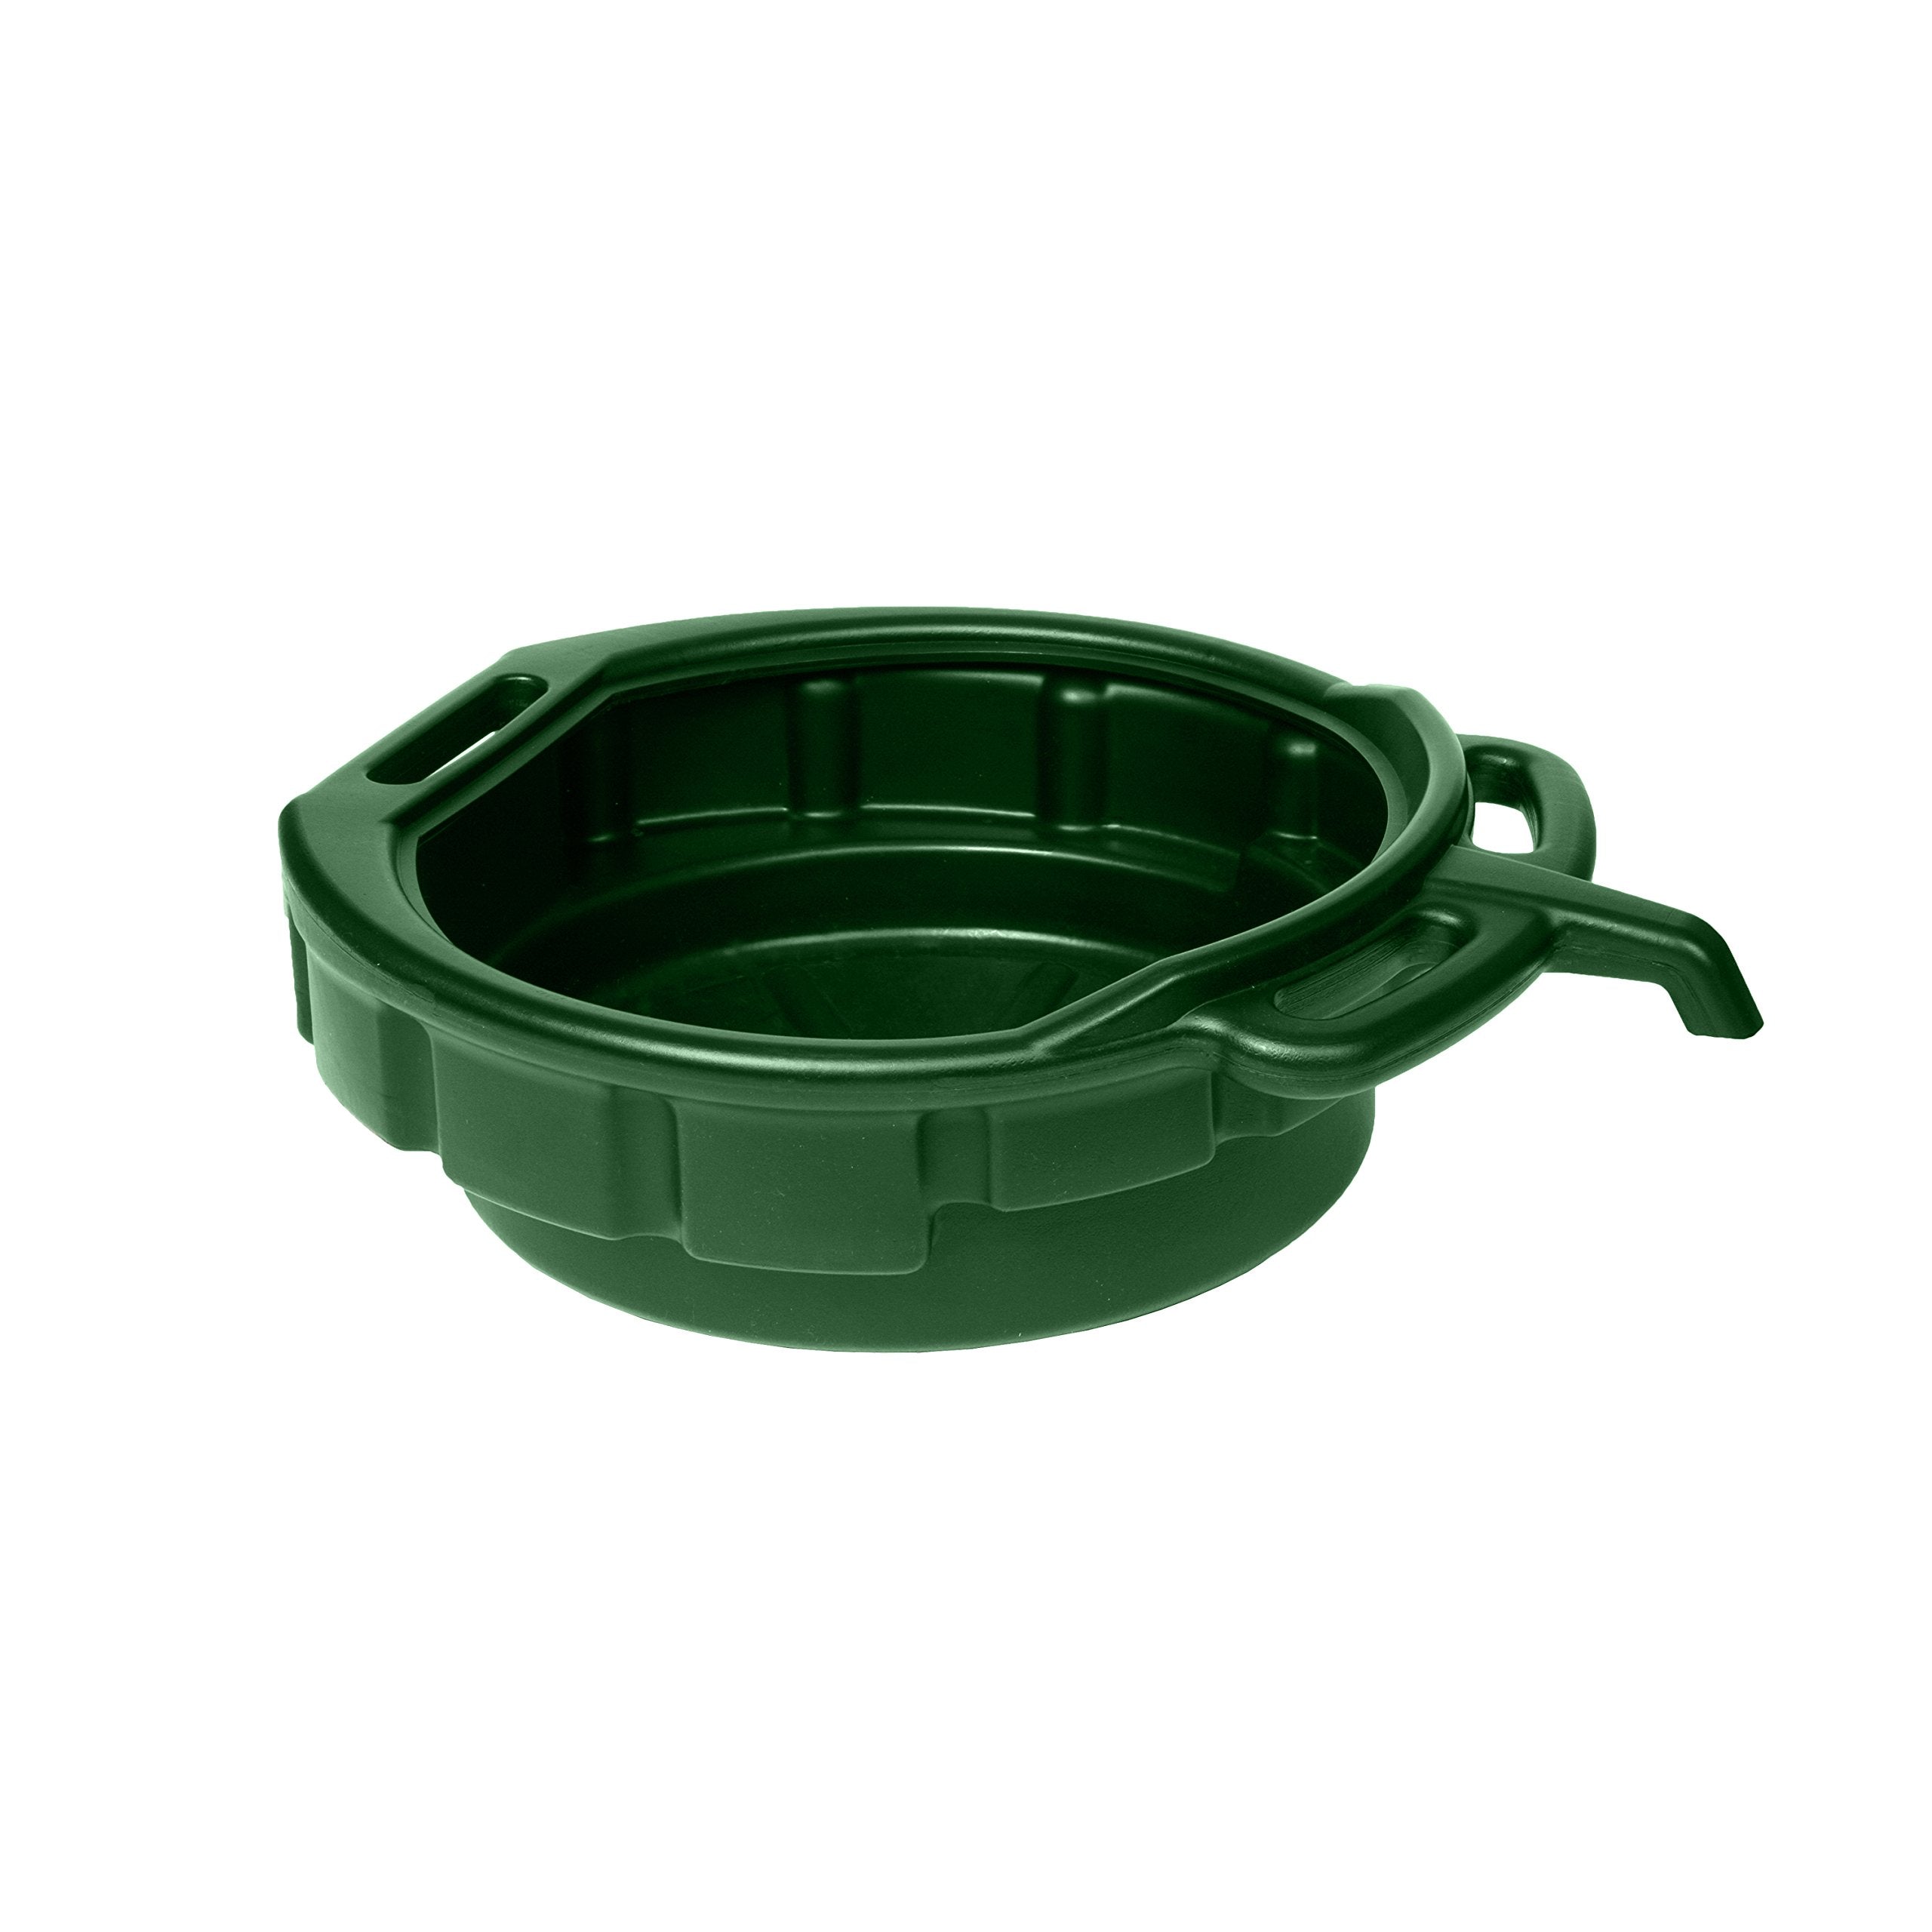 WirthCo 32955 Funnel King Green Oil/Coolant Drain Pan with E-Z Grip Handle